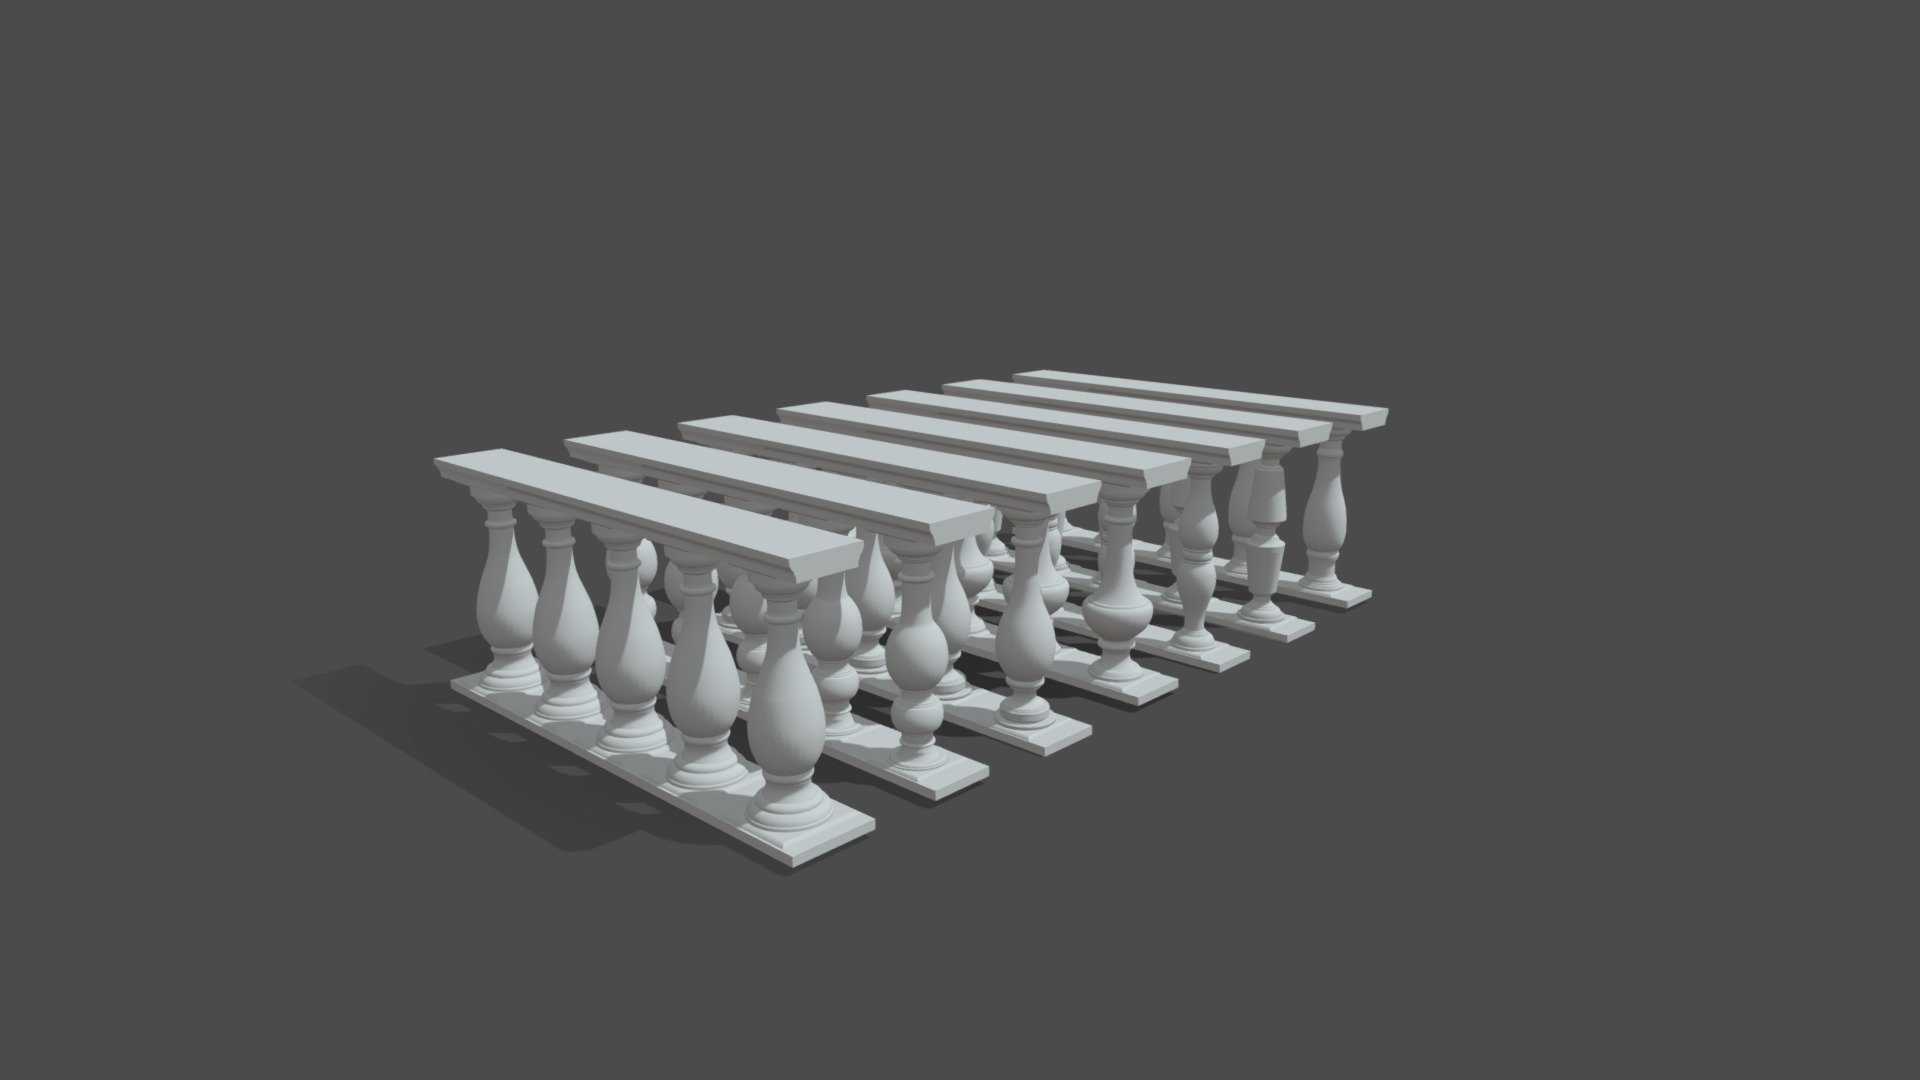 A pack of balustrades you can use in your exterior scenes for your games or animations.

I included eight different formats depending on which one will suit your project.

Feel free to message me for further details and adjustement according to what you're working on.

I also create your 3d models on demand at interesting prices.

Enjoy your download and don't forget to browse my other models 3d model